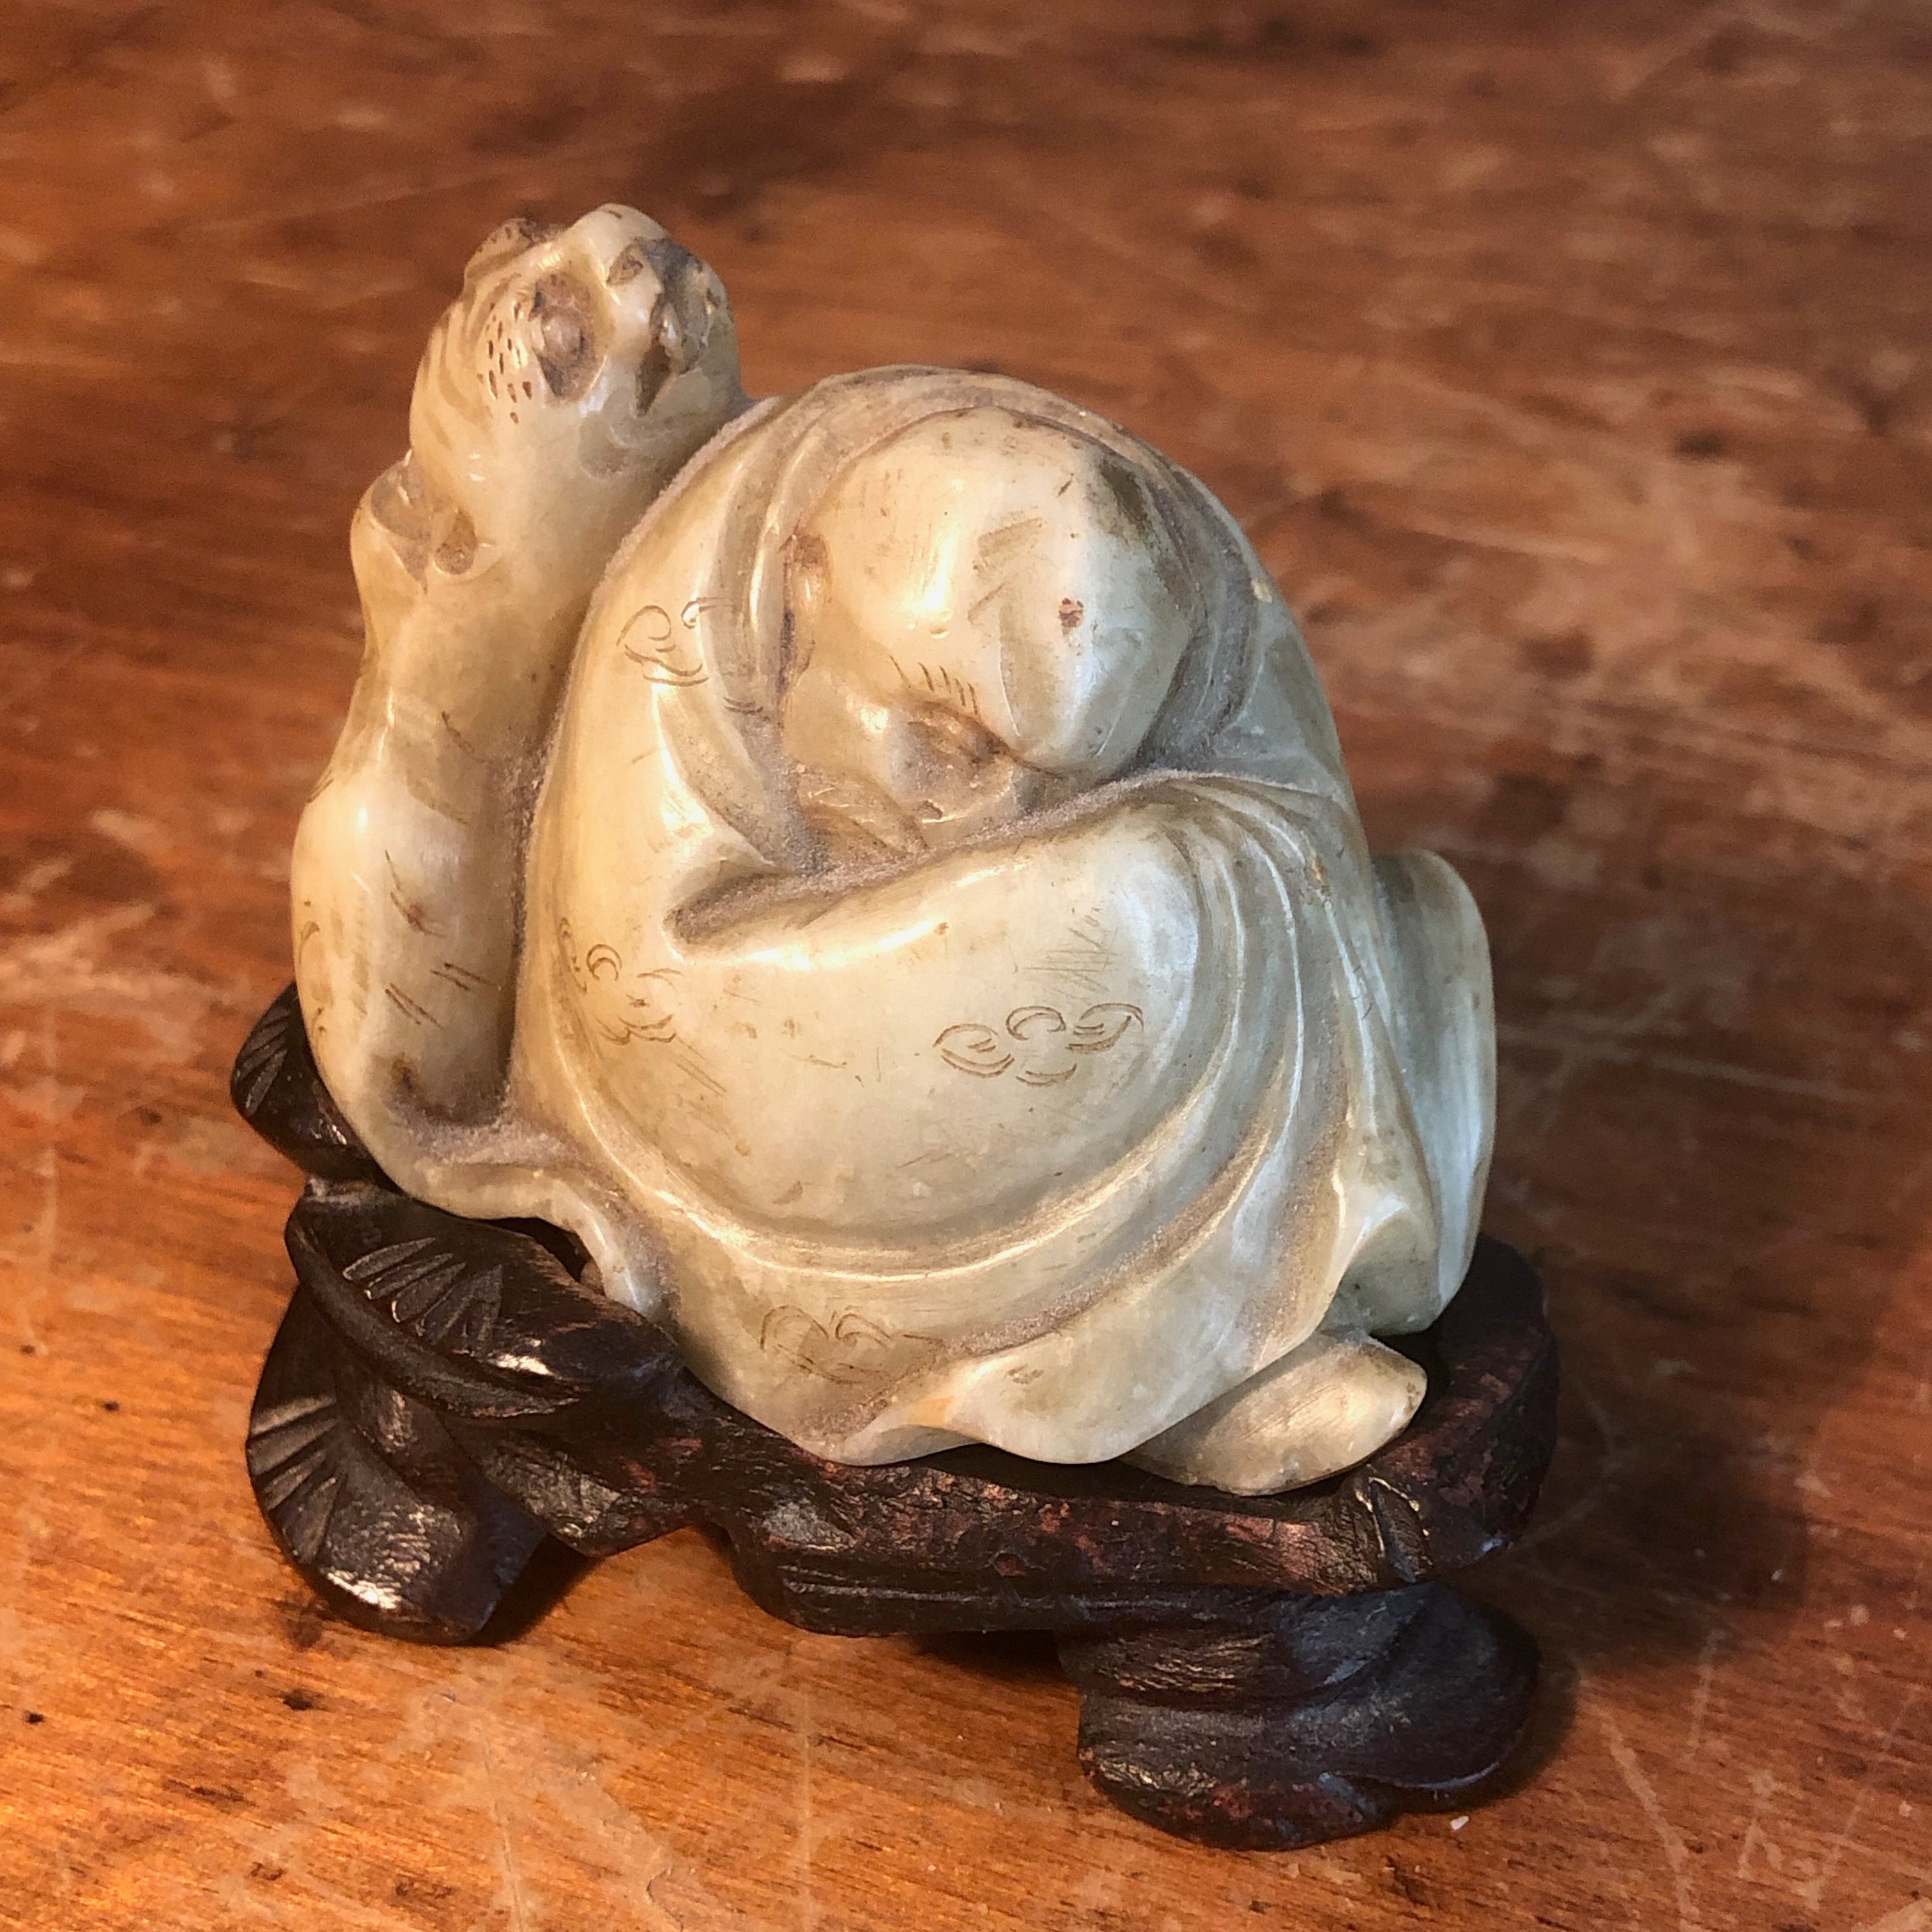 Chinese Jade Sculpture of Foo Dog and Sleeping Man - Carving on Wood - Antique Asian Art - Nephrite 